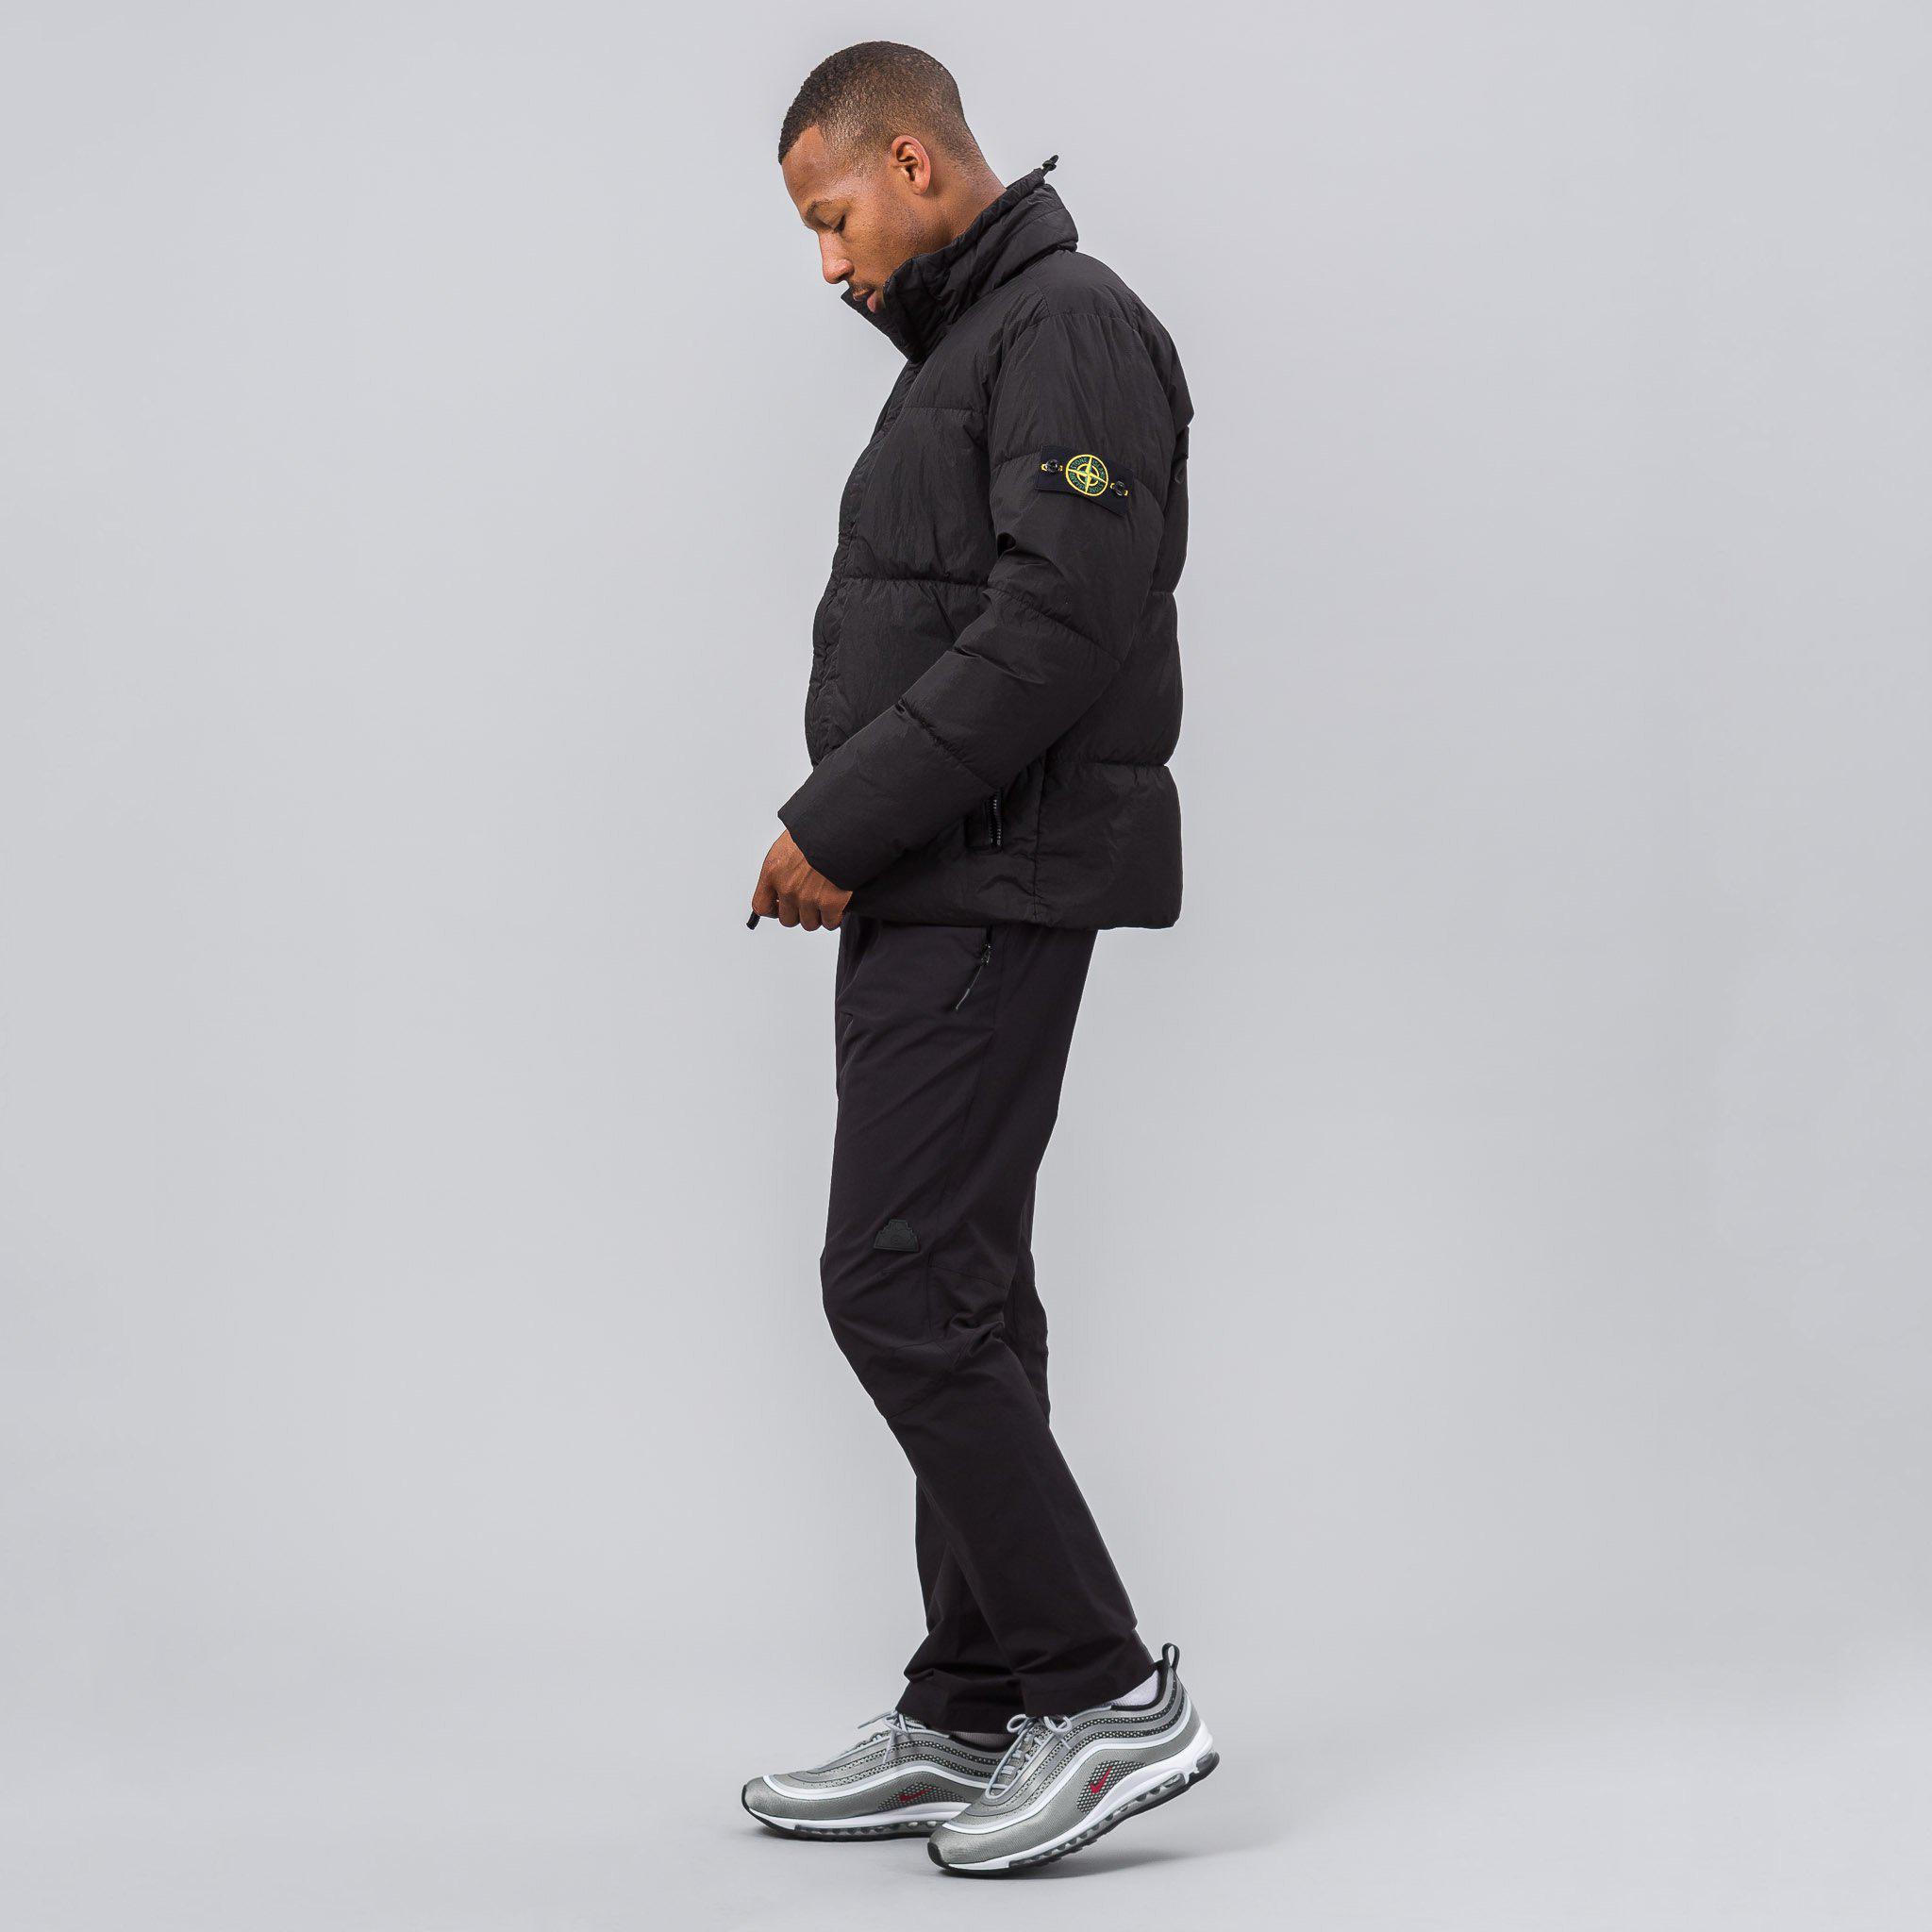 Stone Island 40223 Garment Dyed Crinkle Reps Puffy Down Jacket In